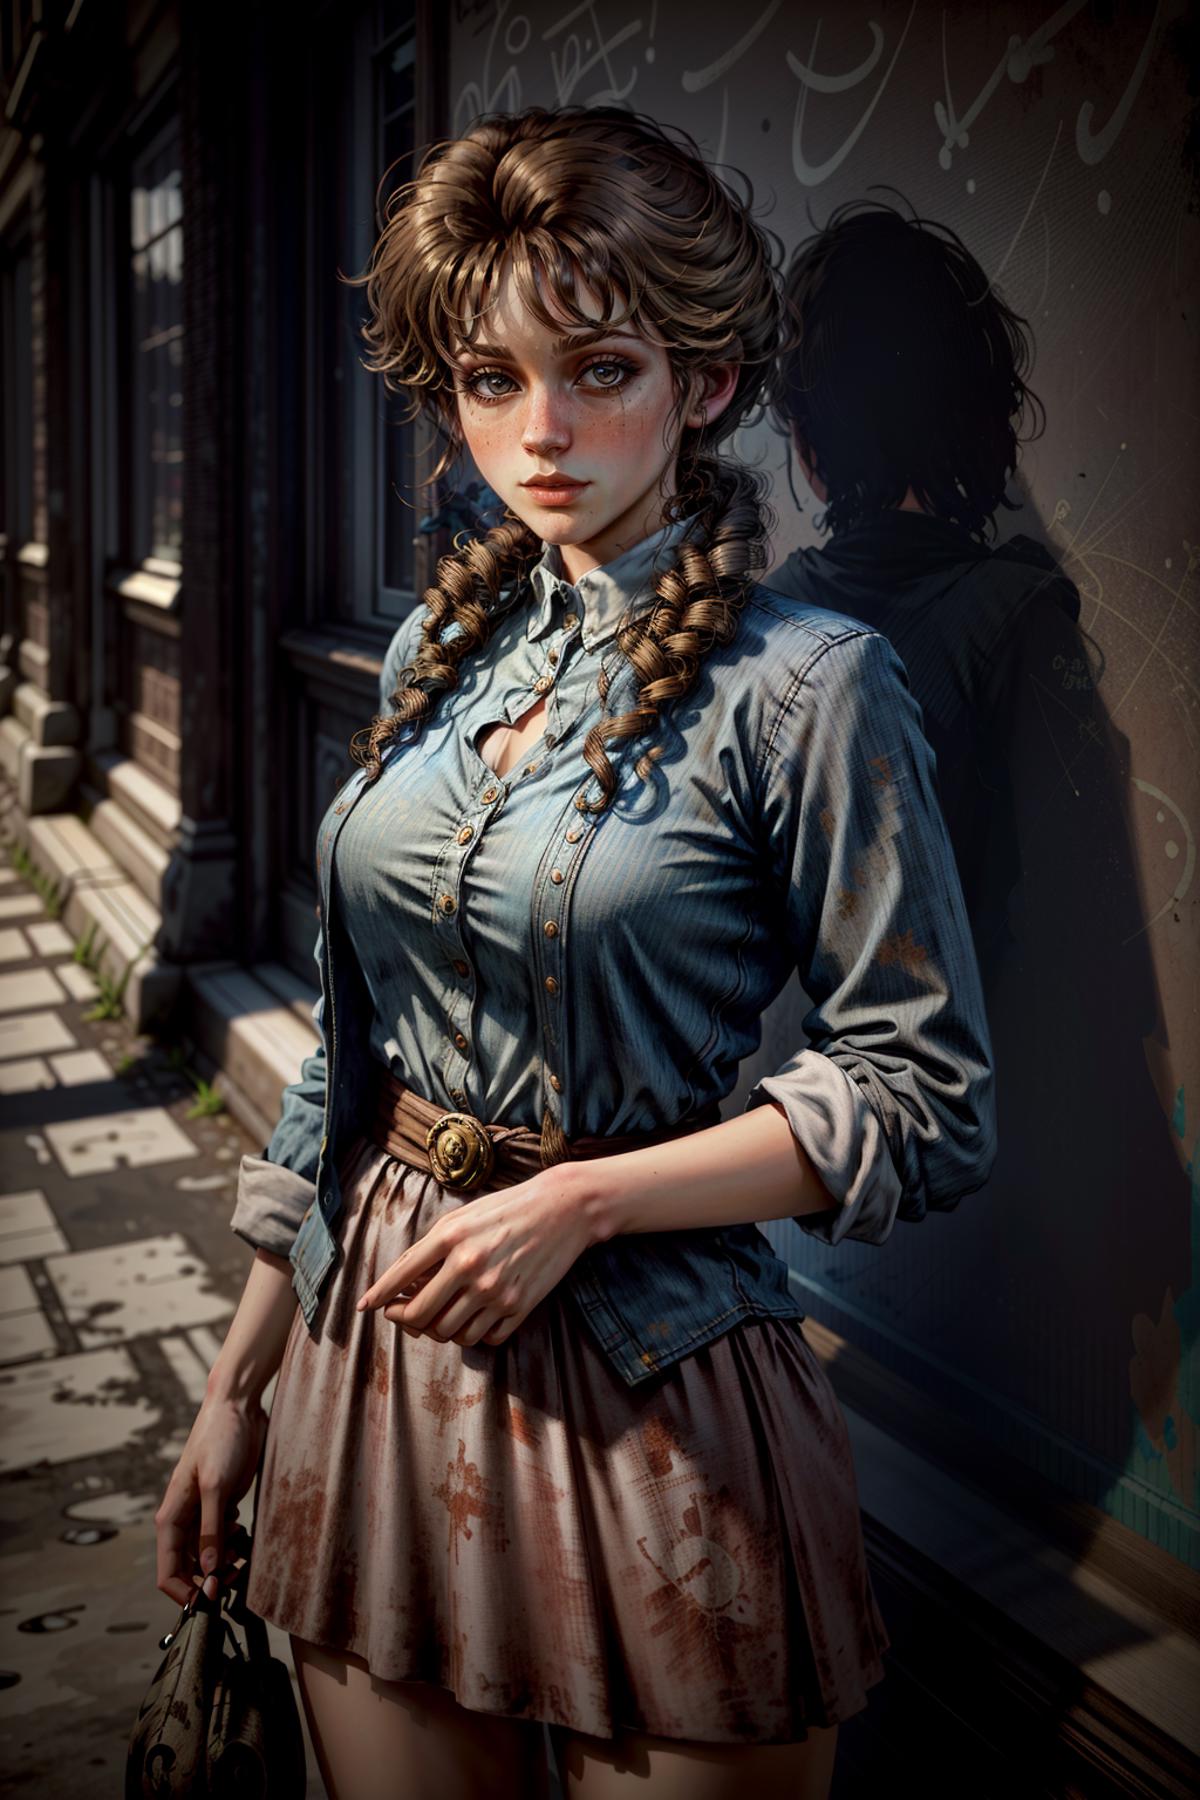 Mary-Beth from Red Dead Redemption 2 image by BloodRedKittie